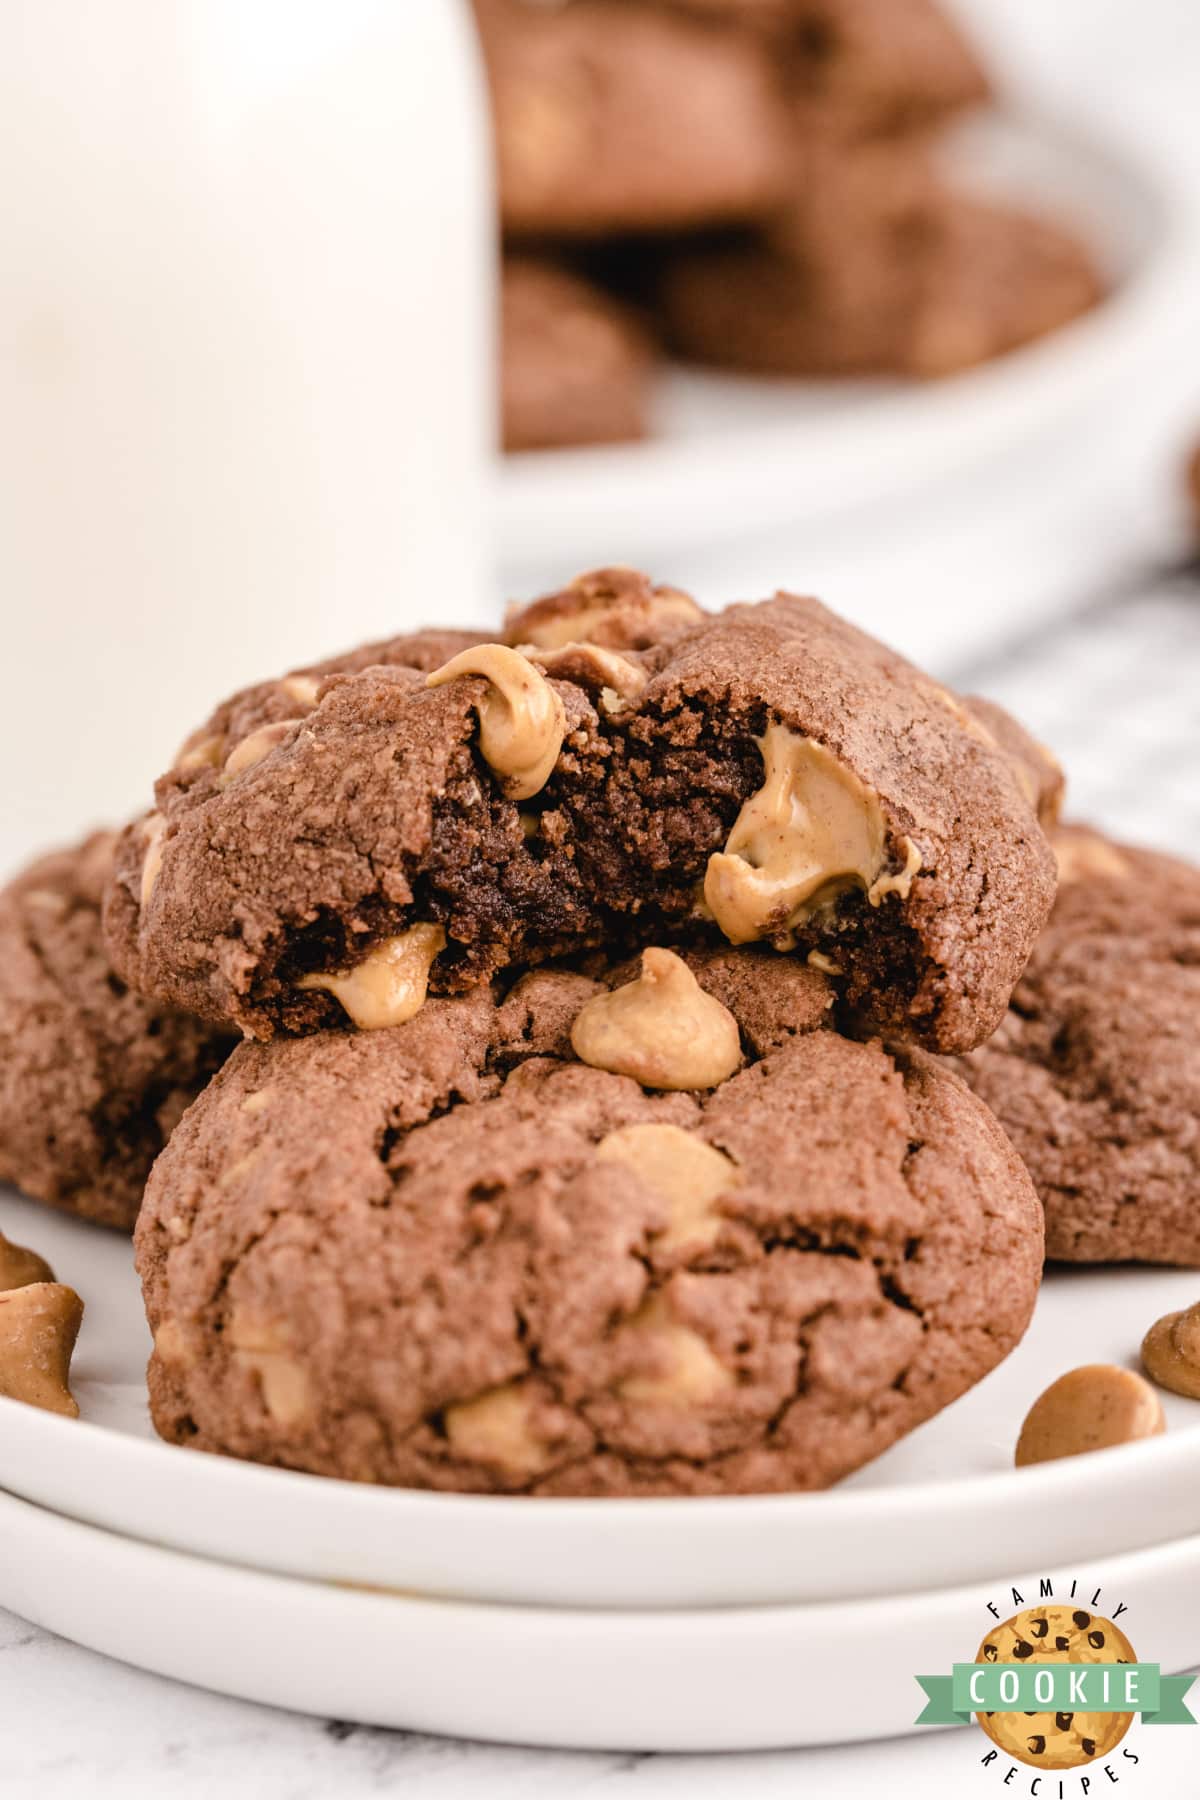 Chocolate Peanut Butter Chip Cookies made with chocolate pudding mix for a soft and chewy cookie that is loaded with chocolate flavor and Reese's peanut butter chips.